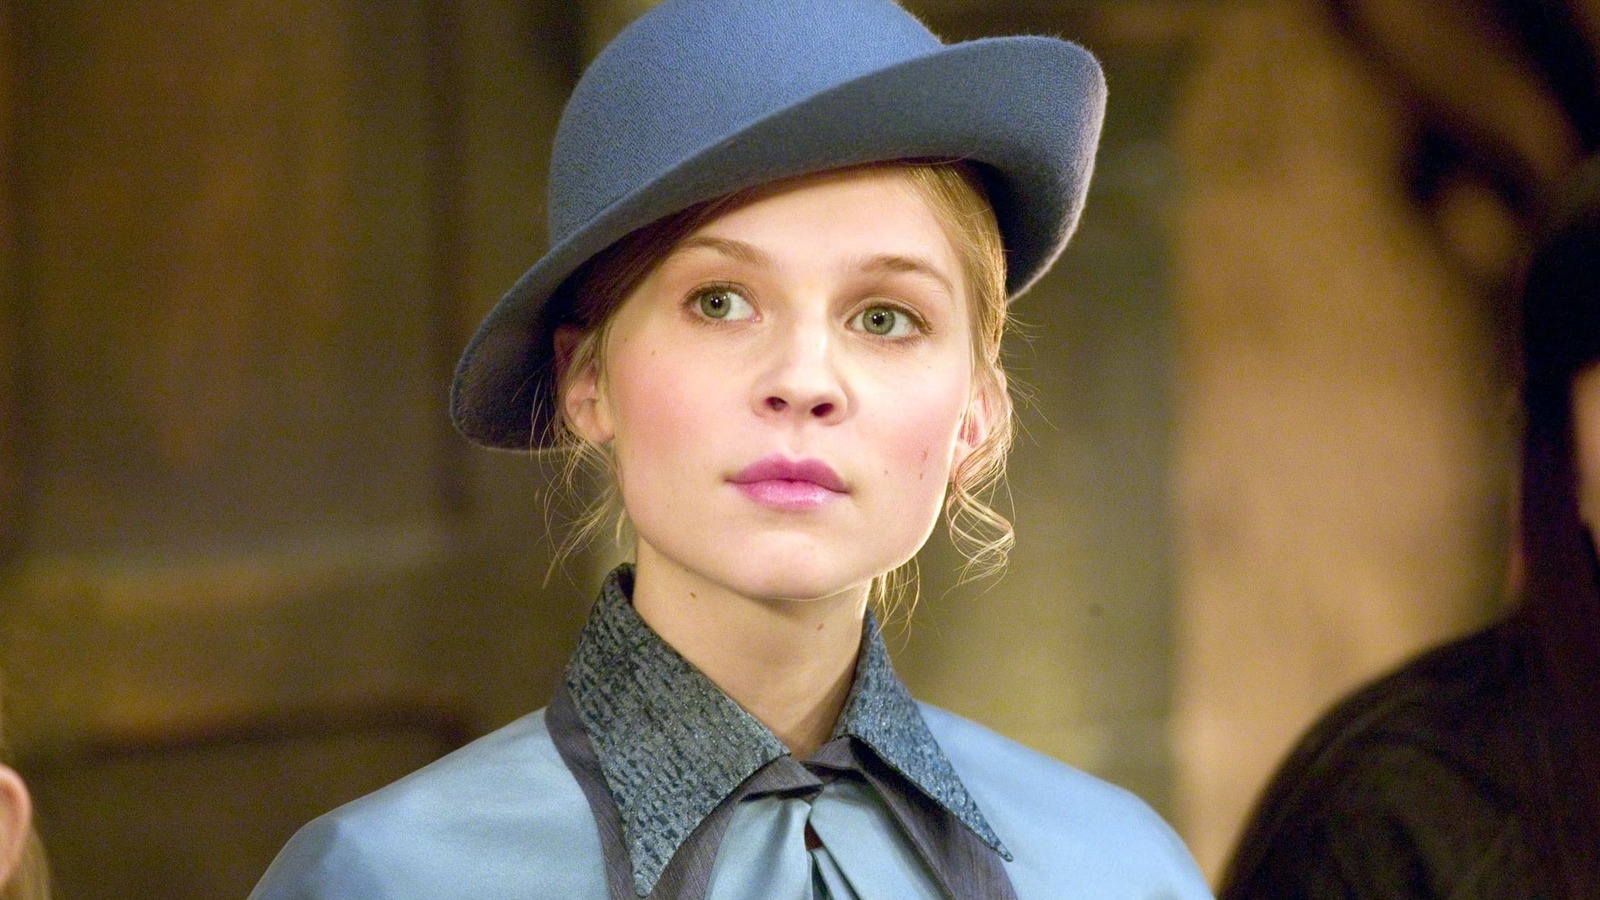 Who played the character of Fleur Delacour's grandfather in the Harry Potter films? 2